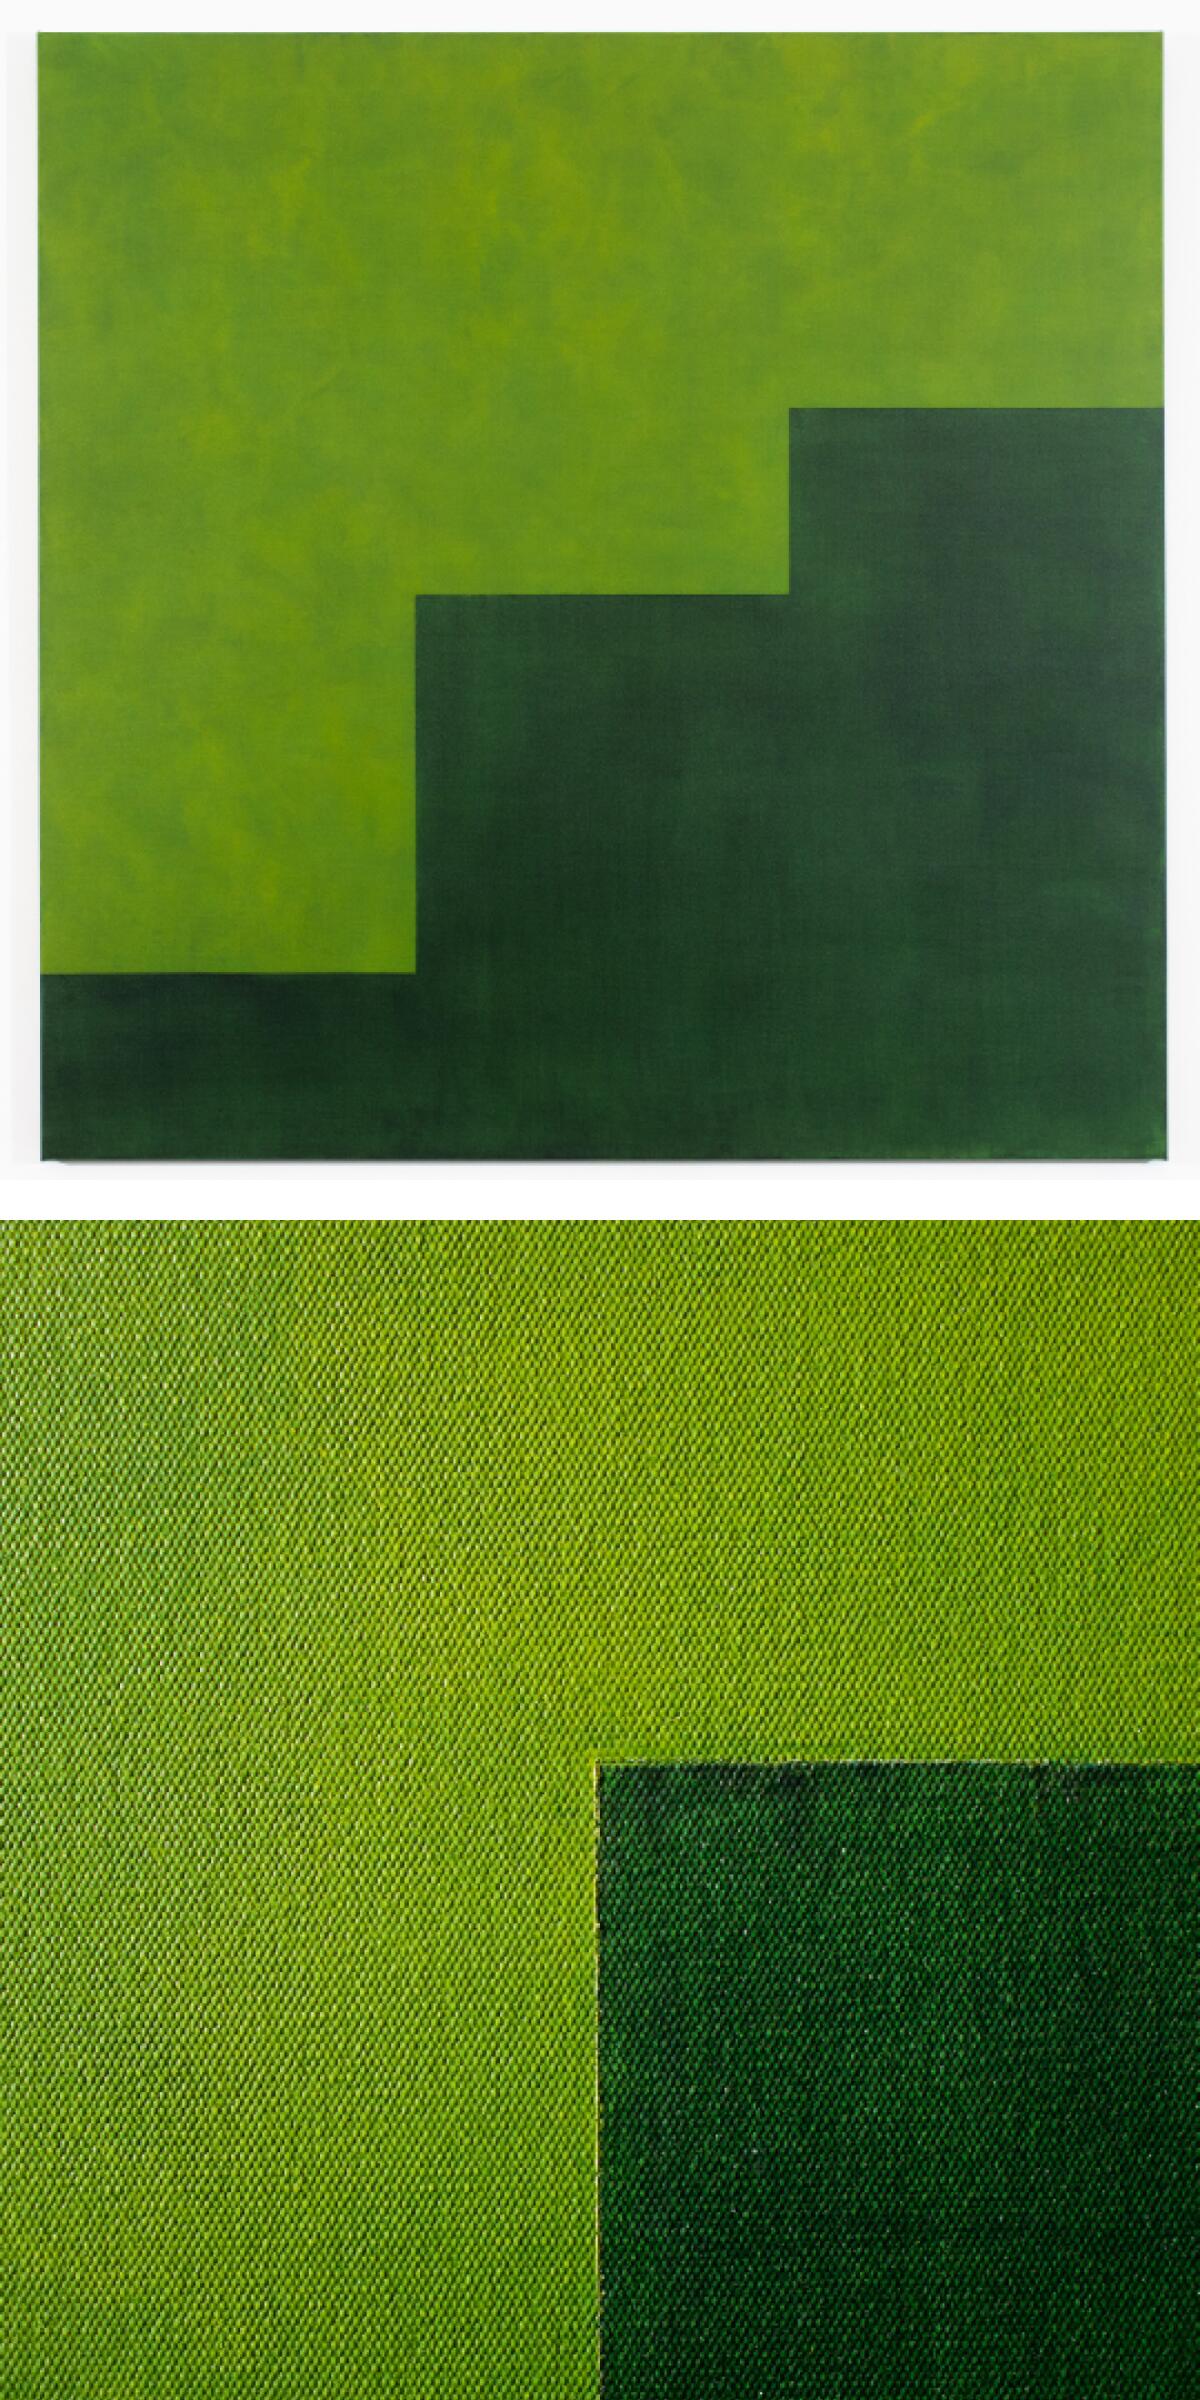 A diptych showing Virginia Jaramillo's work with a detail showing texture below.